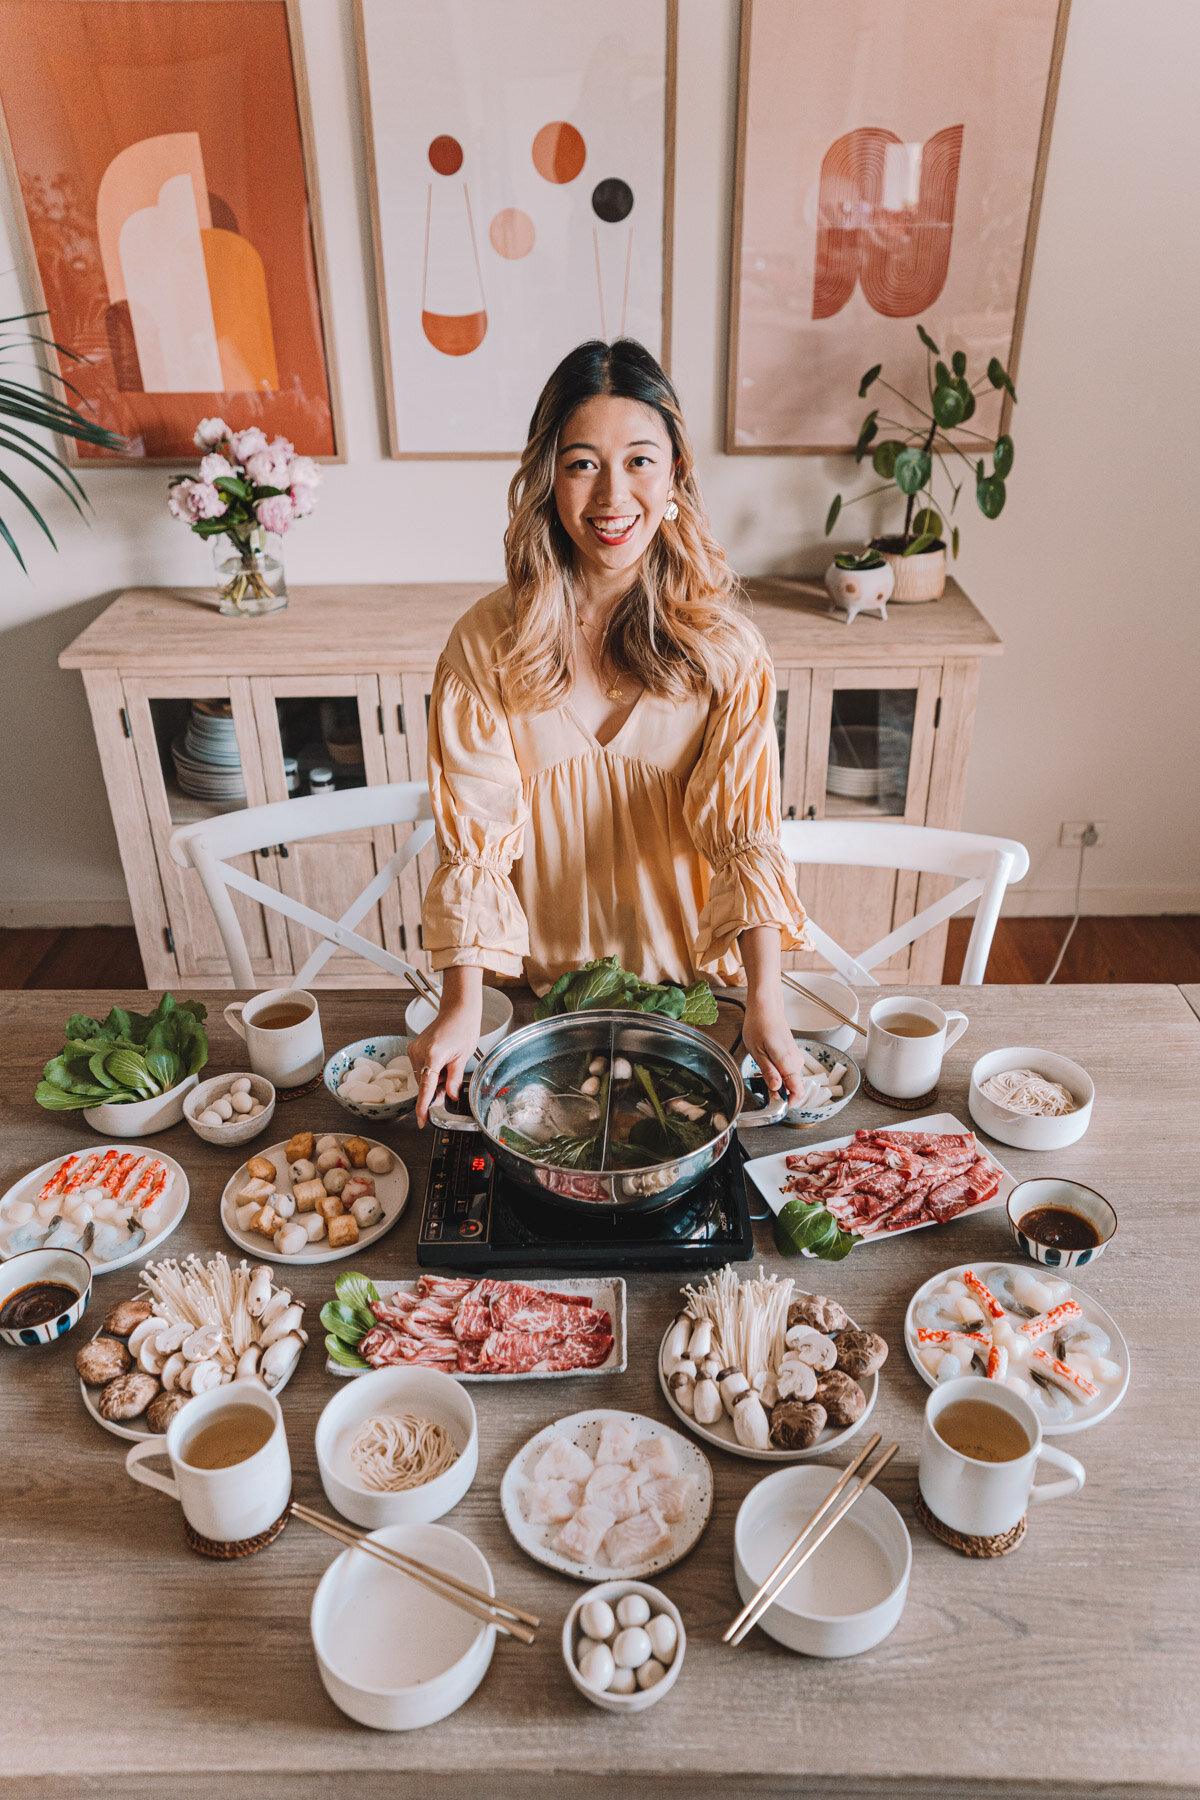 https://images.squarespace-cdn.com/content/v1/5e1077b0019b062397153b23/1592289751491-OWVJYY1K0337ARDUHQ6T/Chinese+Hot+Pot+Guide+How+to+Hot+Pot+at+Home-64.jpg